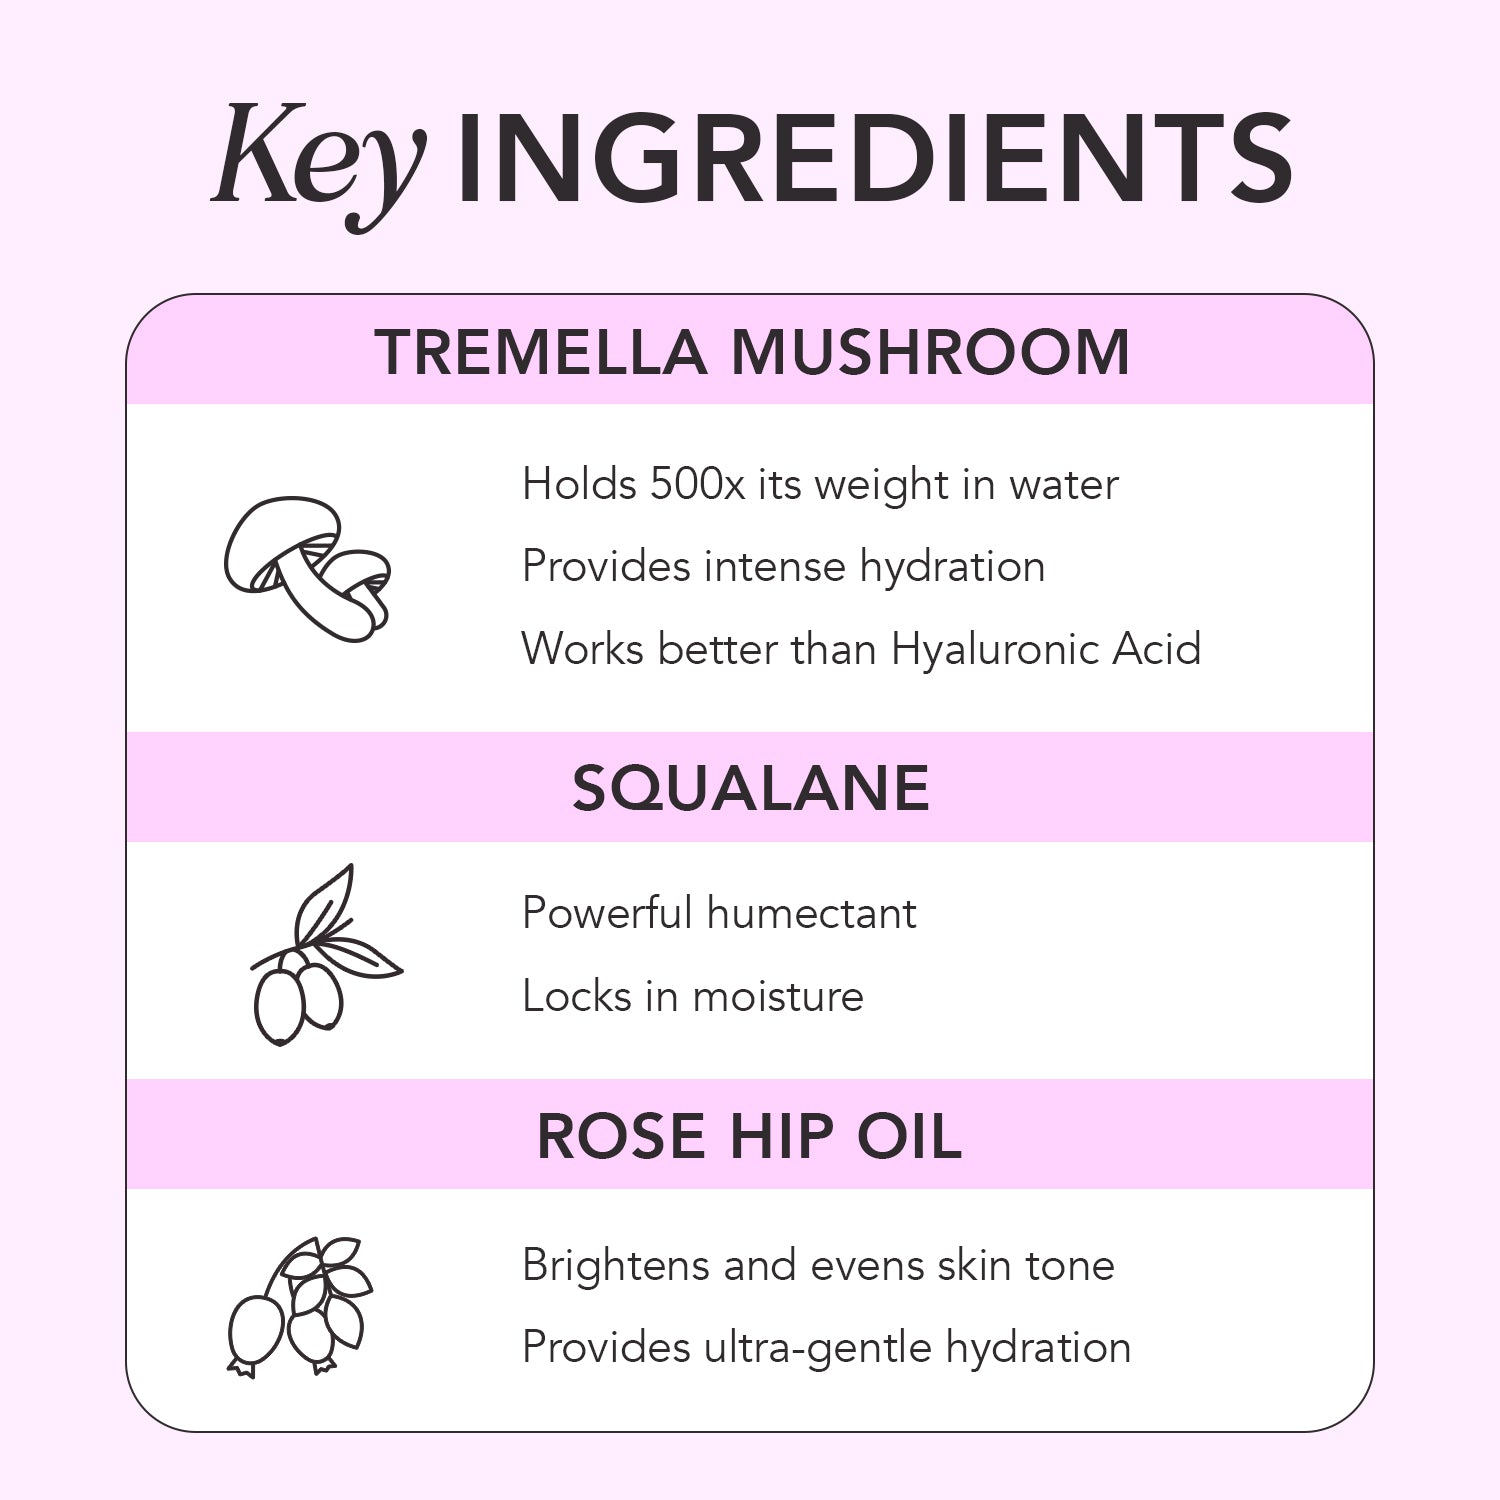 Graphic titled 'Key Ingredients' with illustration of mushroom, branch with olives and rose hip seeds with descriptions: Tremella Mushroom, Squalane and Rose Hip Oil